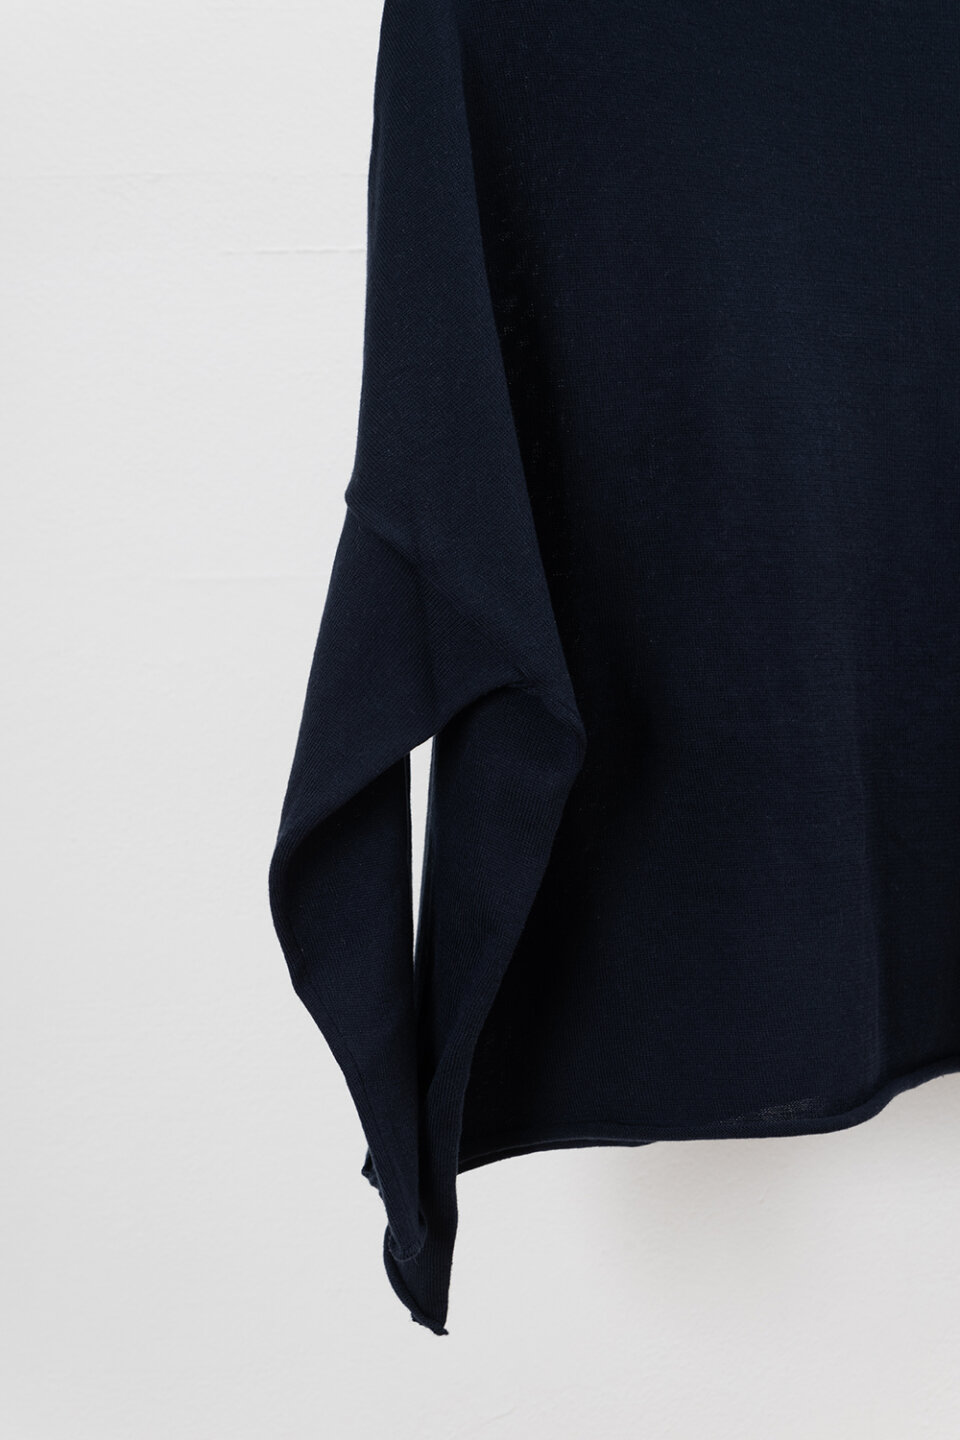 Maglia Over navy 3 - Officinae